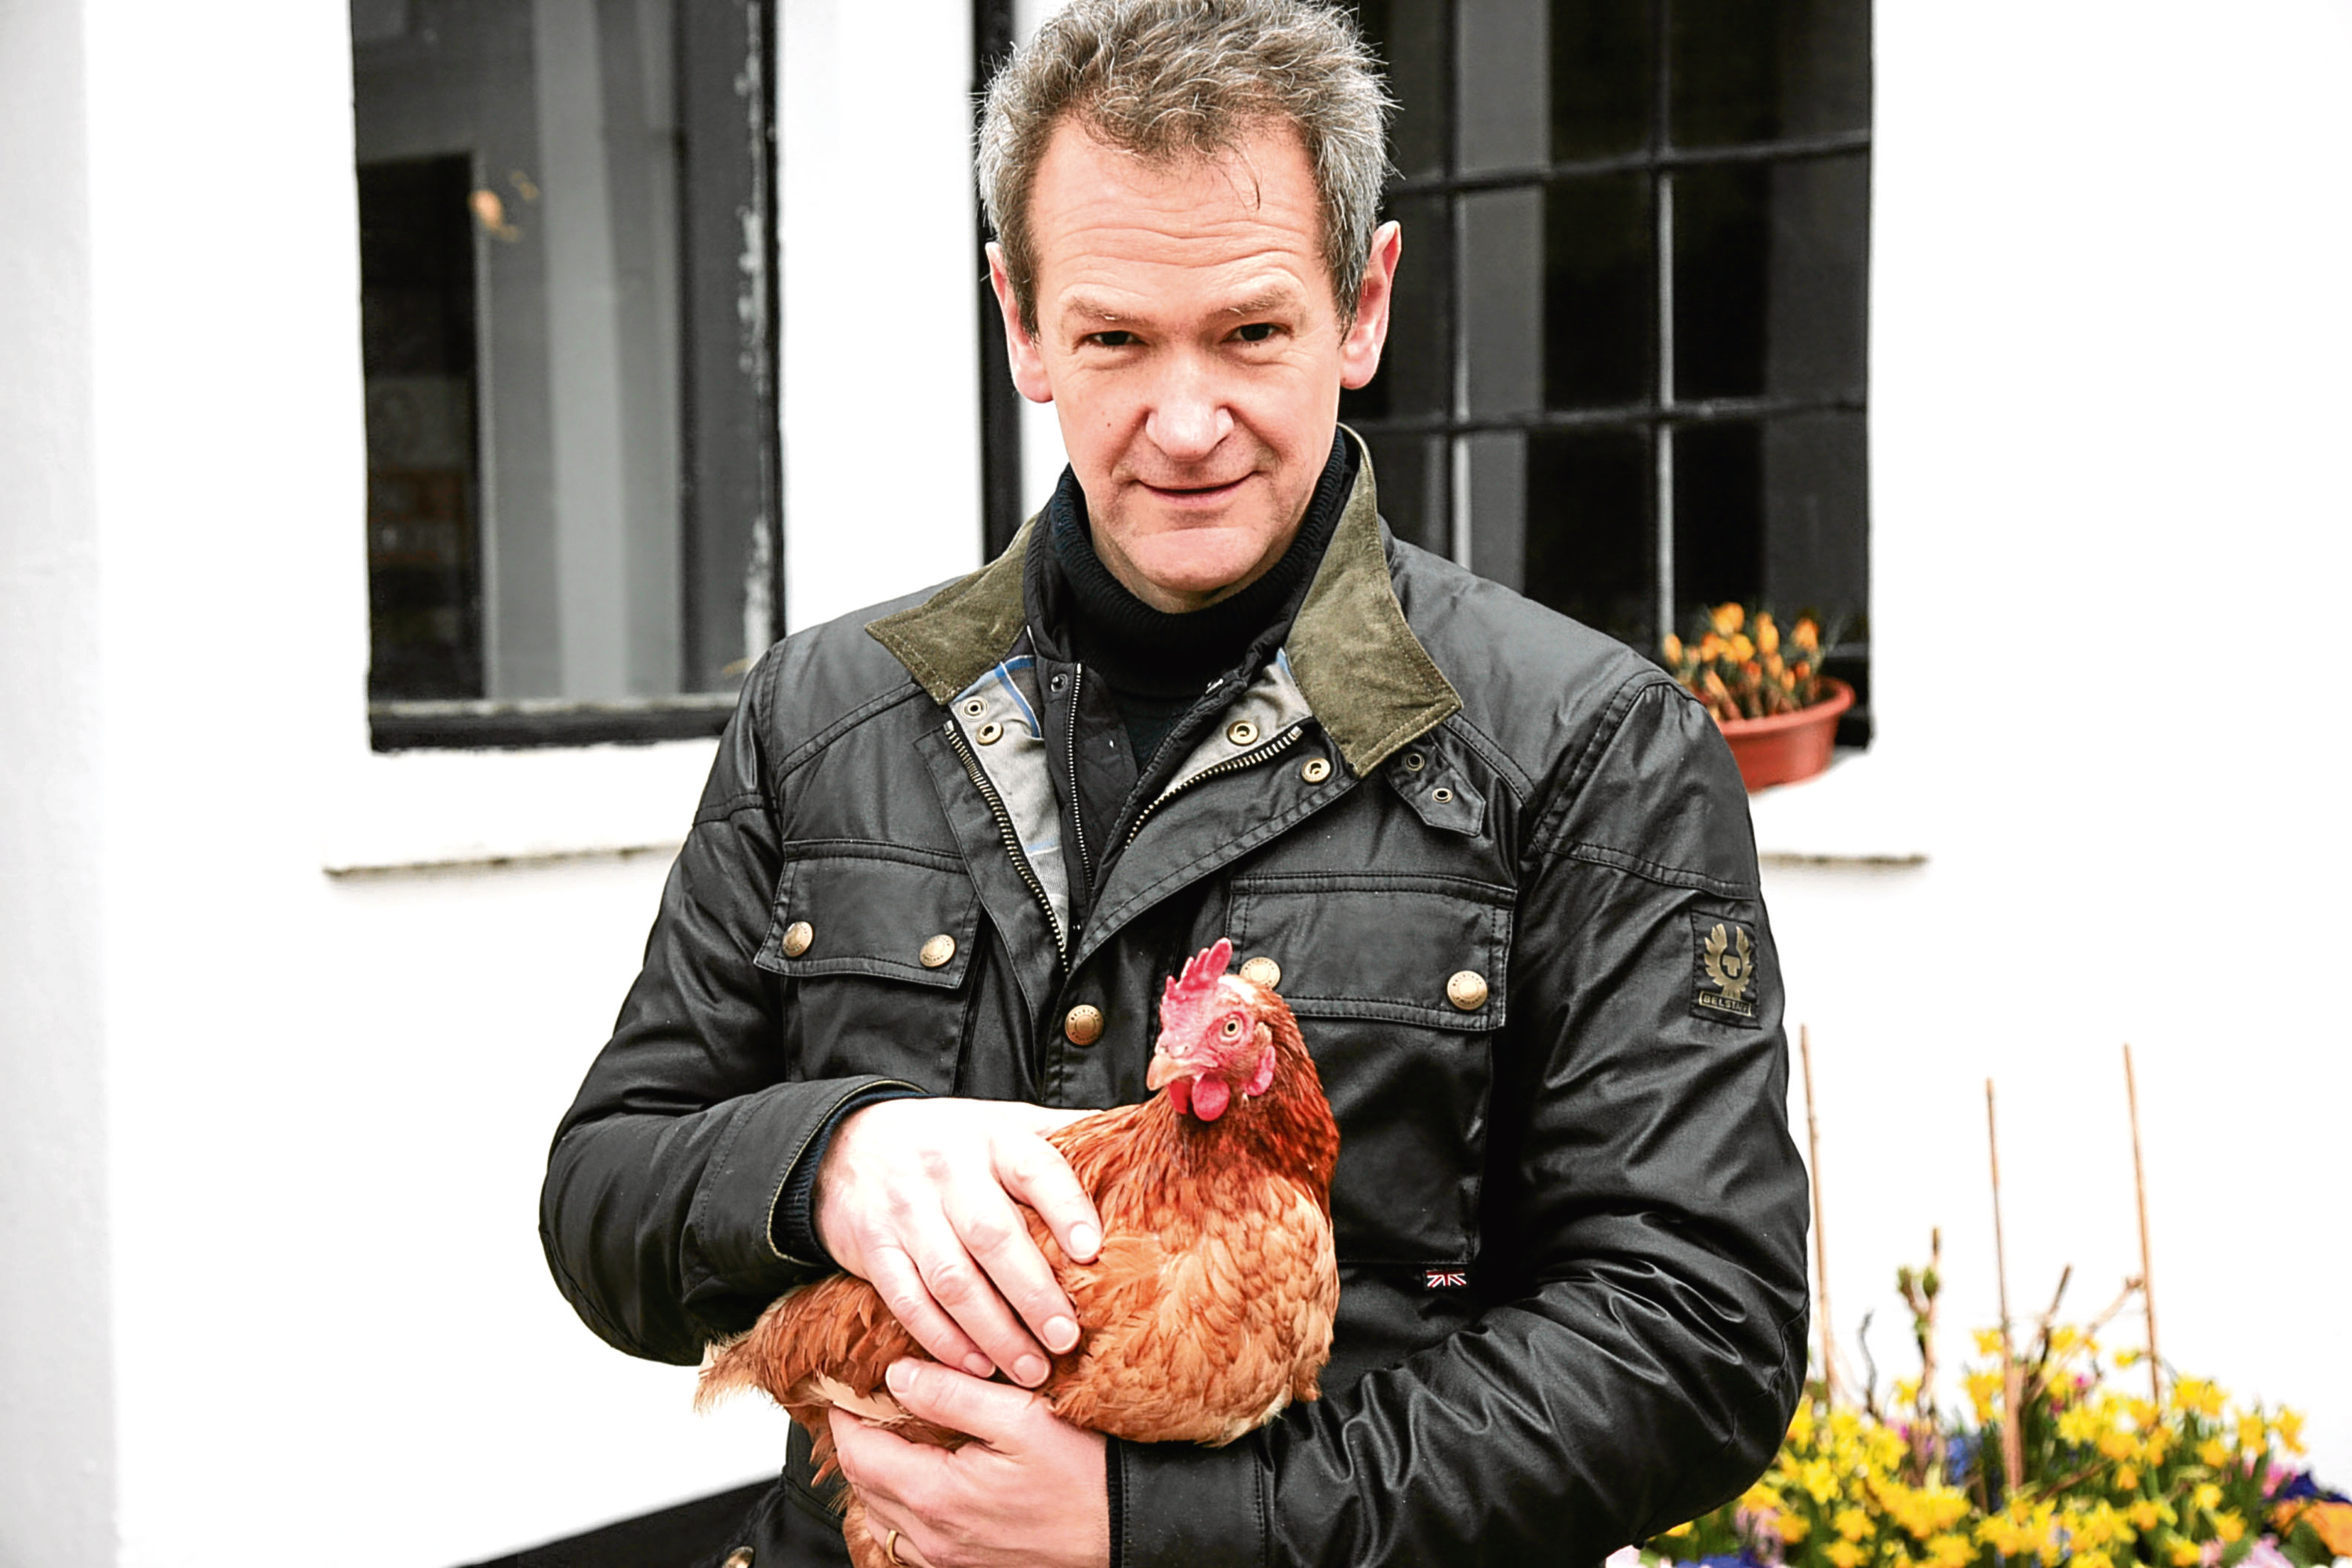 Alexander Armstrong (ITV / Plimsoll Productions)